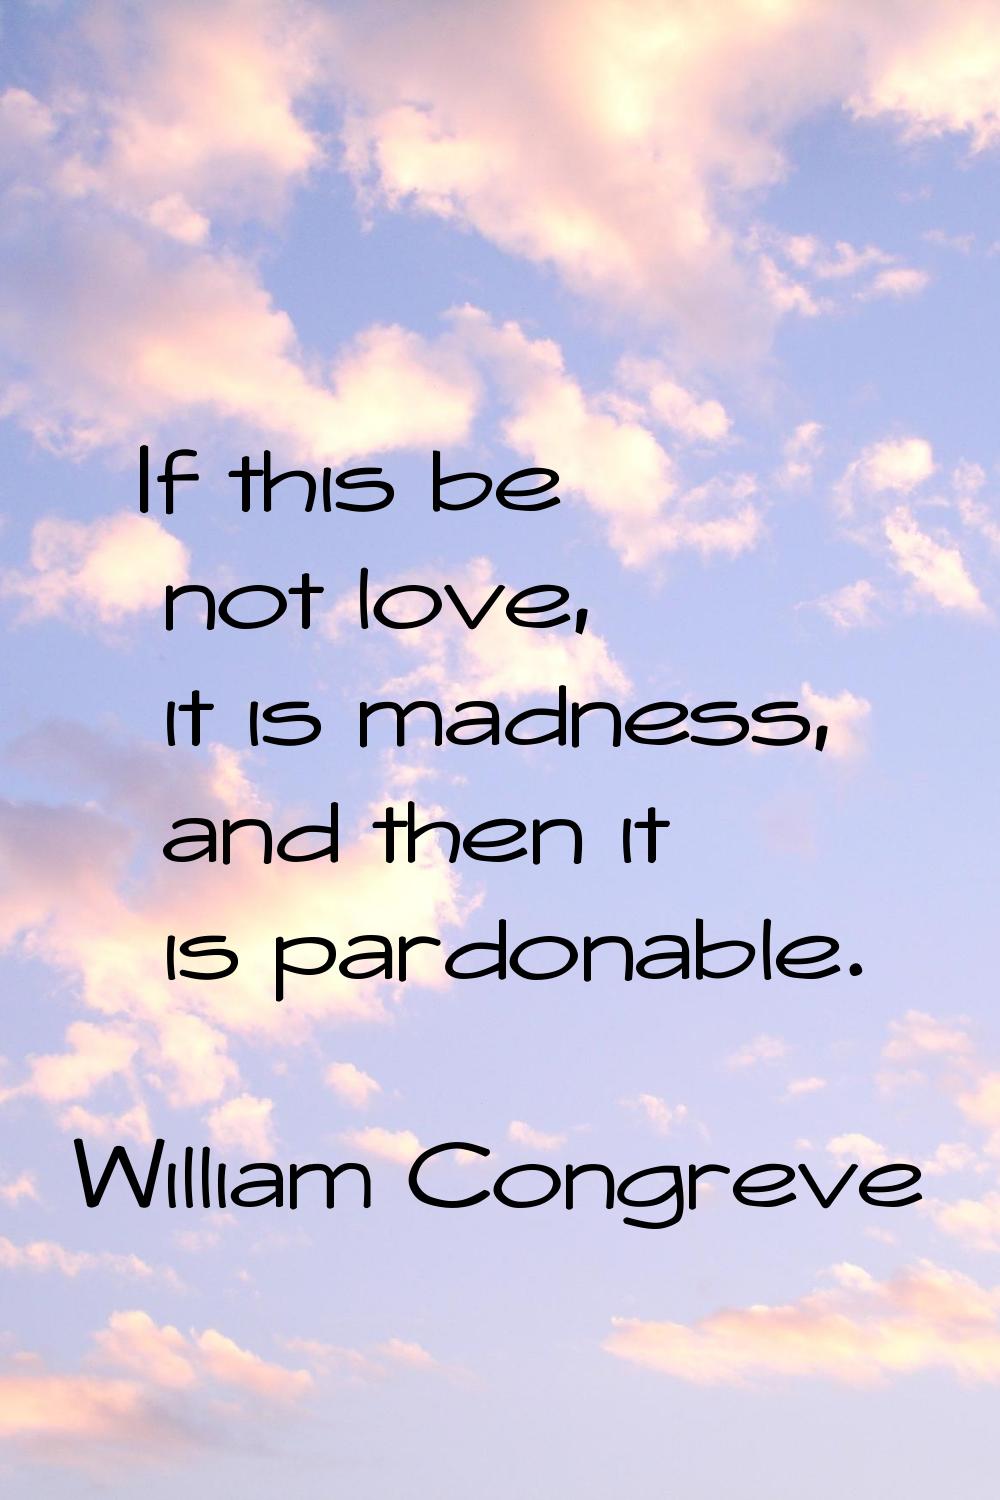 If this be not love, it is madness, and then it is pardonable.